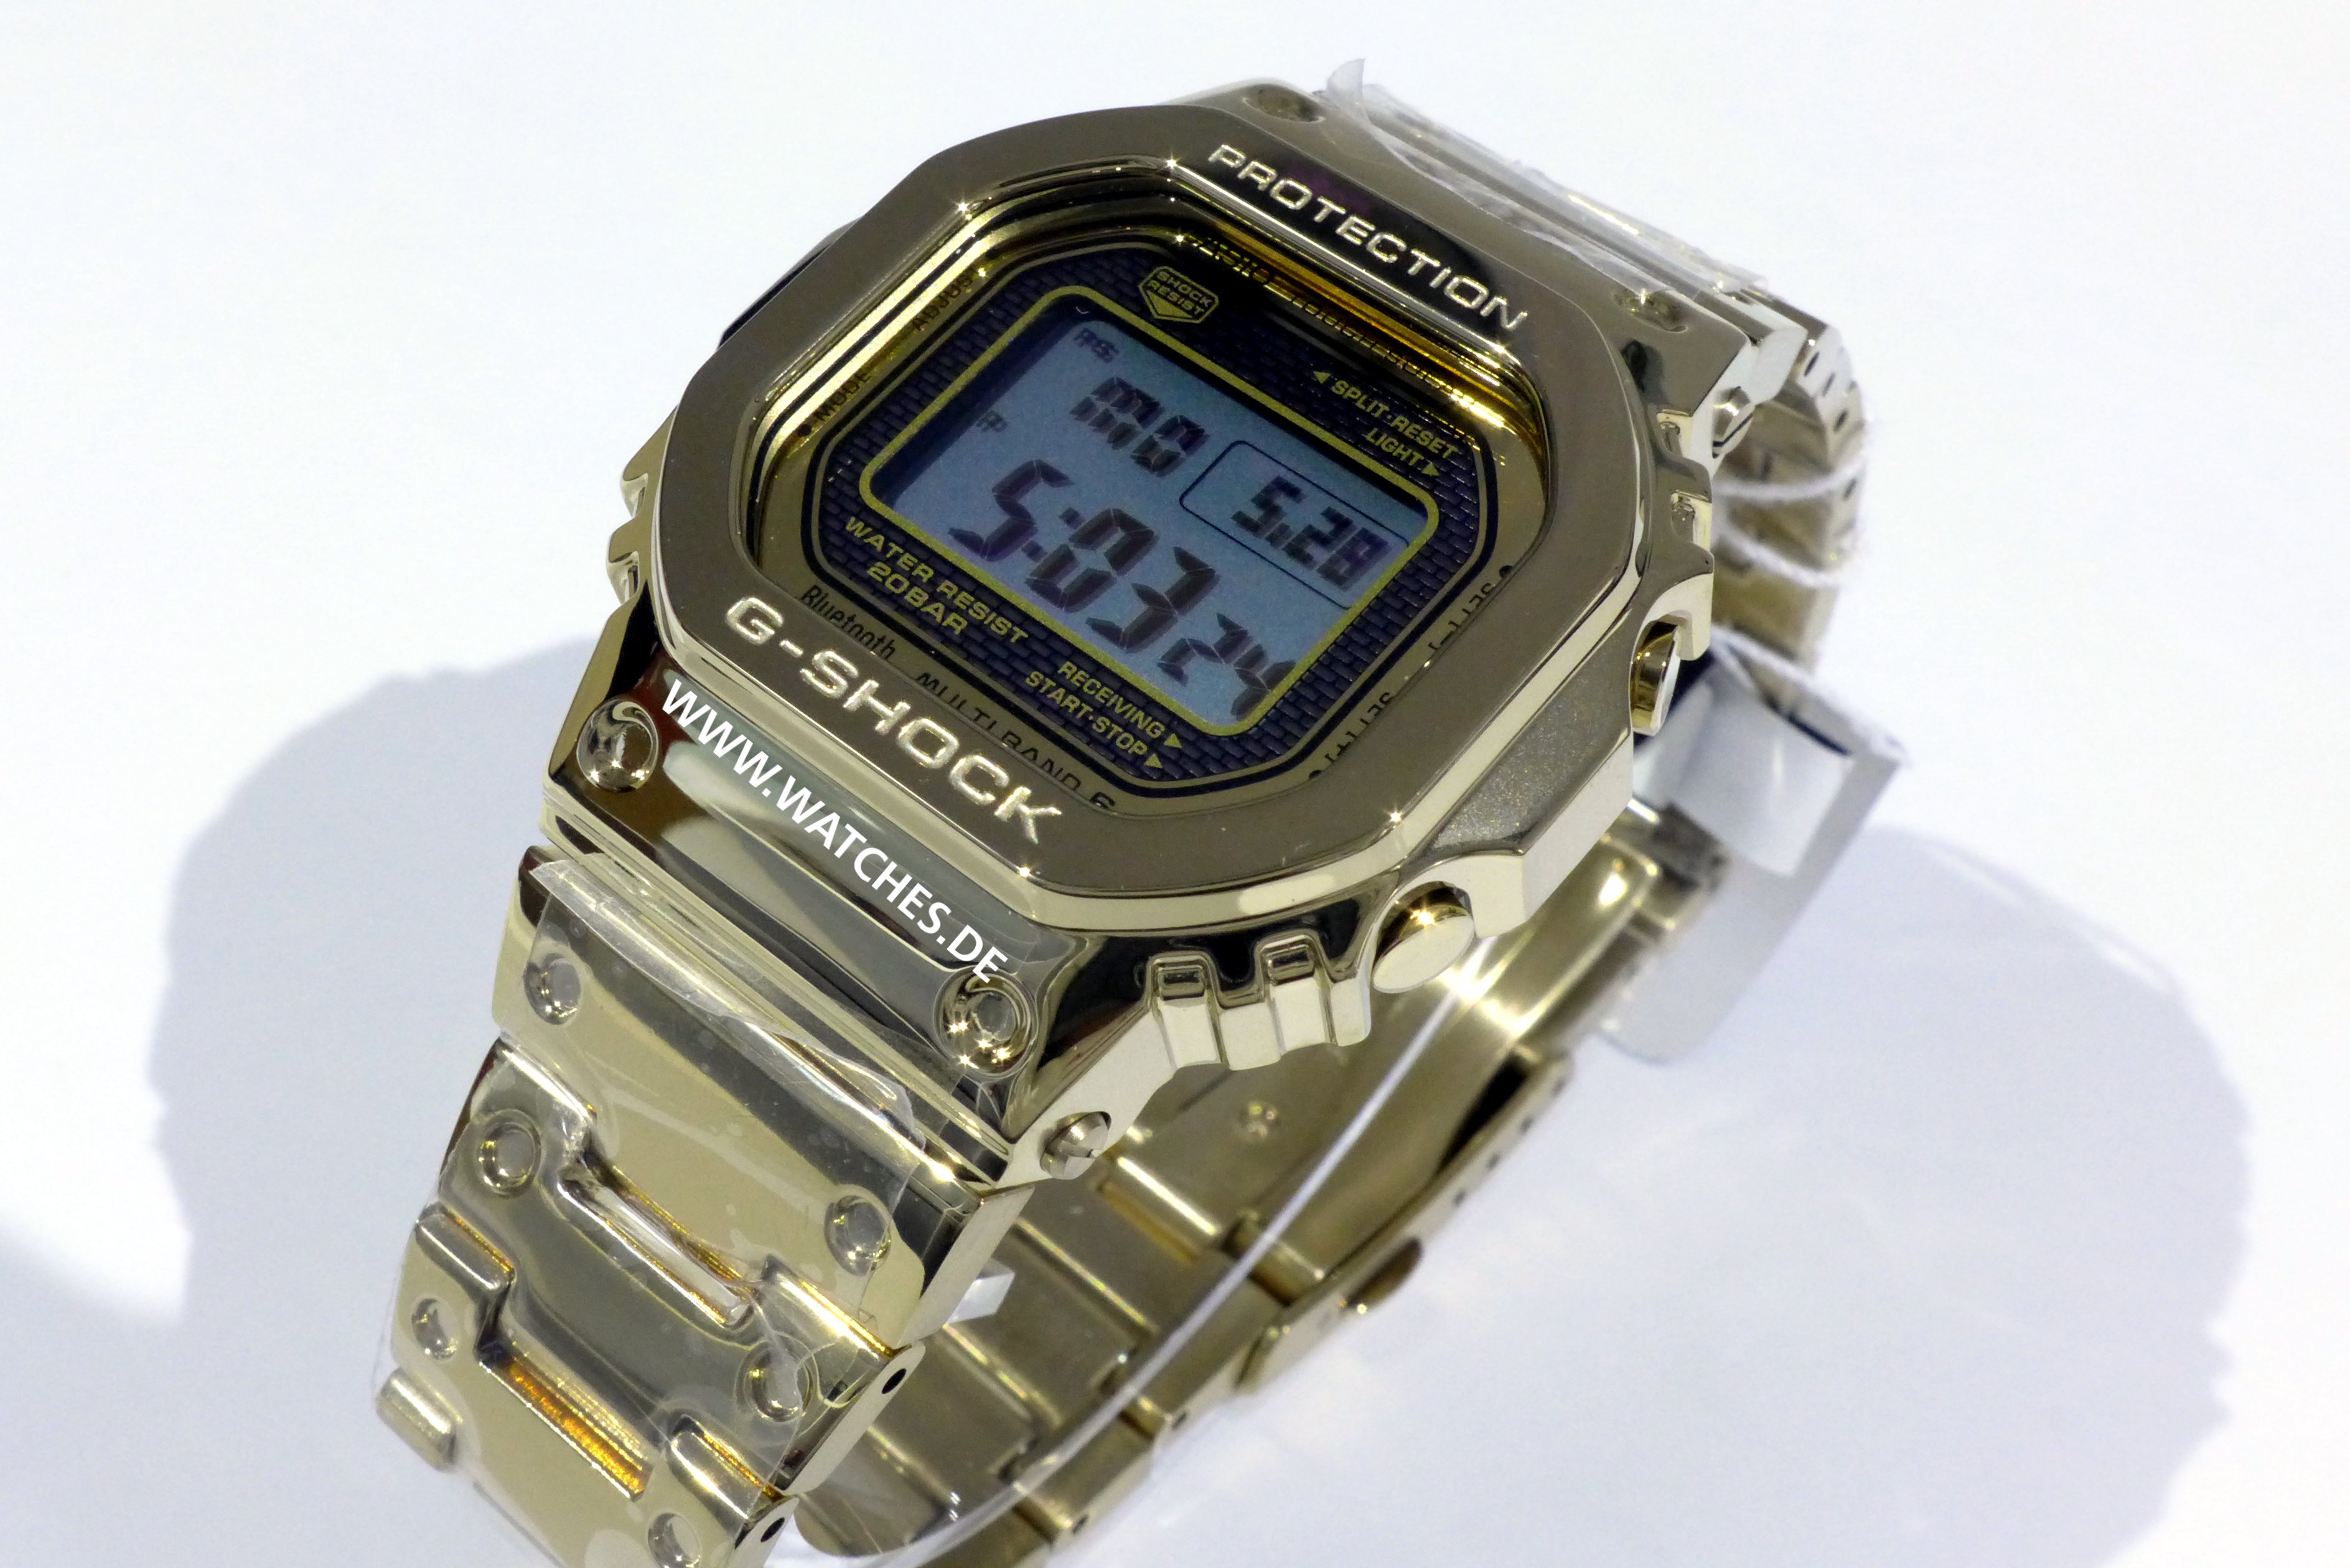 Casio G-shock 35th Anniversary Gold Full Metal Limited Edition  GMW-B5000TFG-9 Luxury brand watches for sale, Monaco, Zurich, Dubai, Hong  Kong